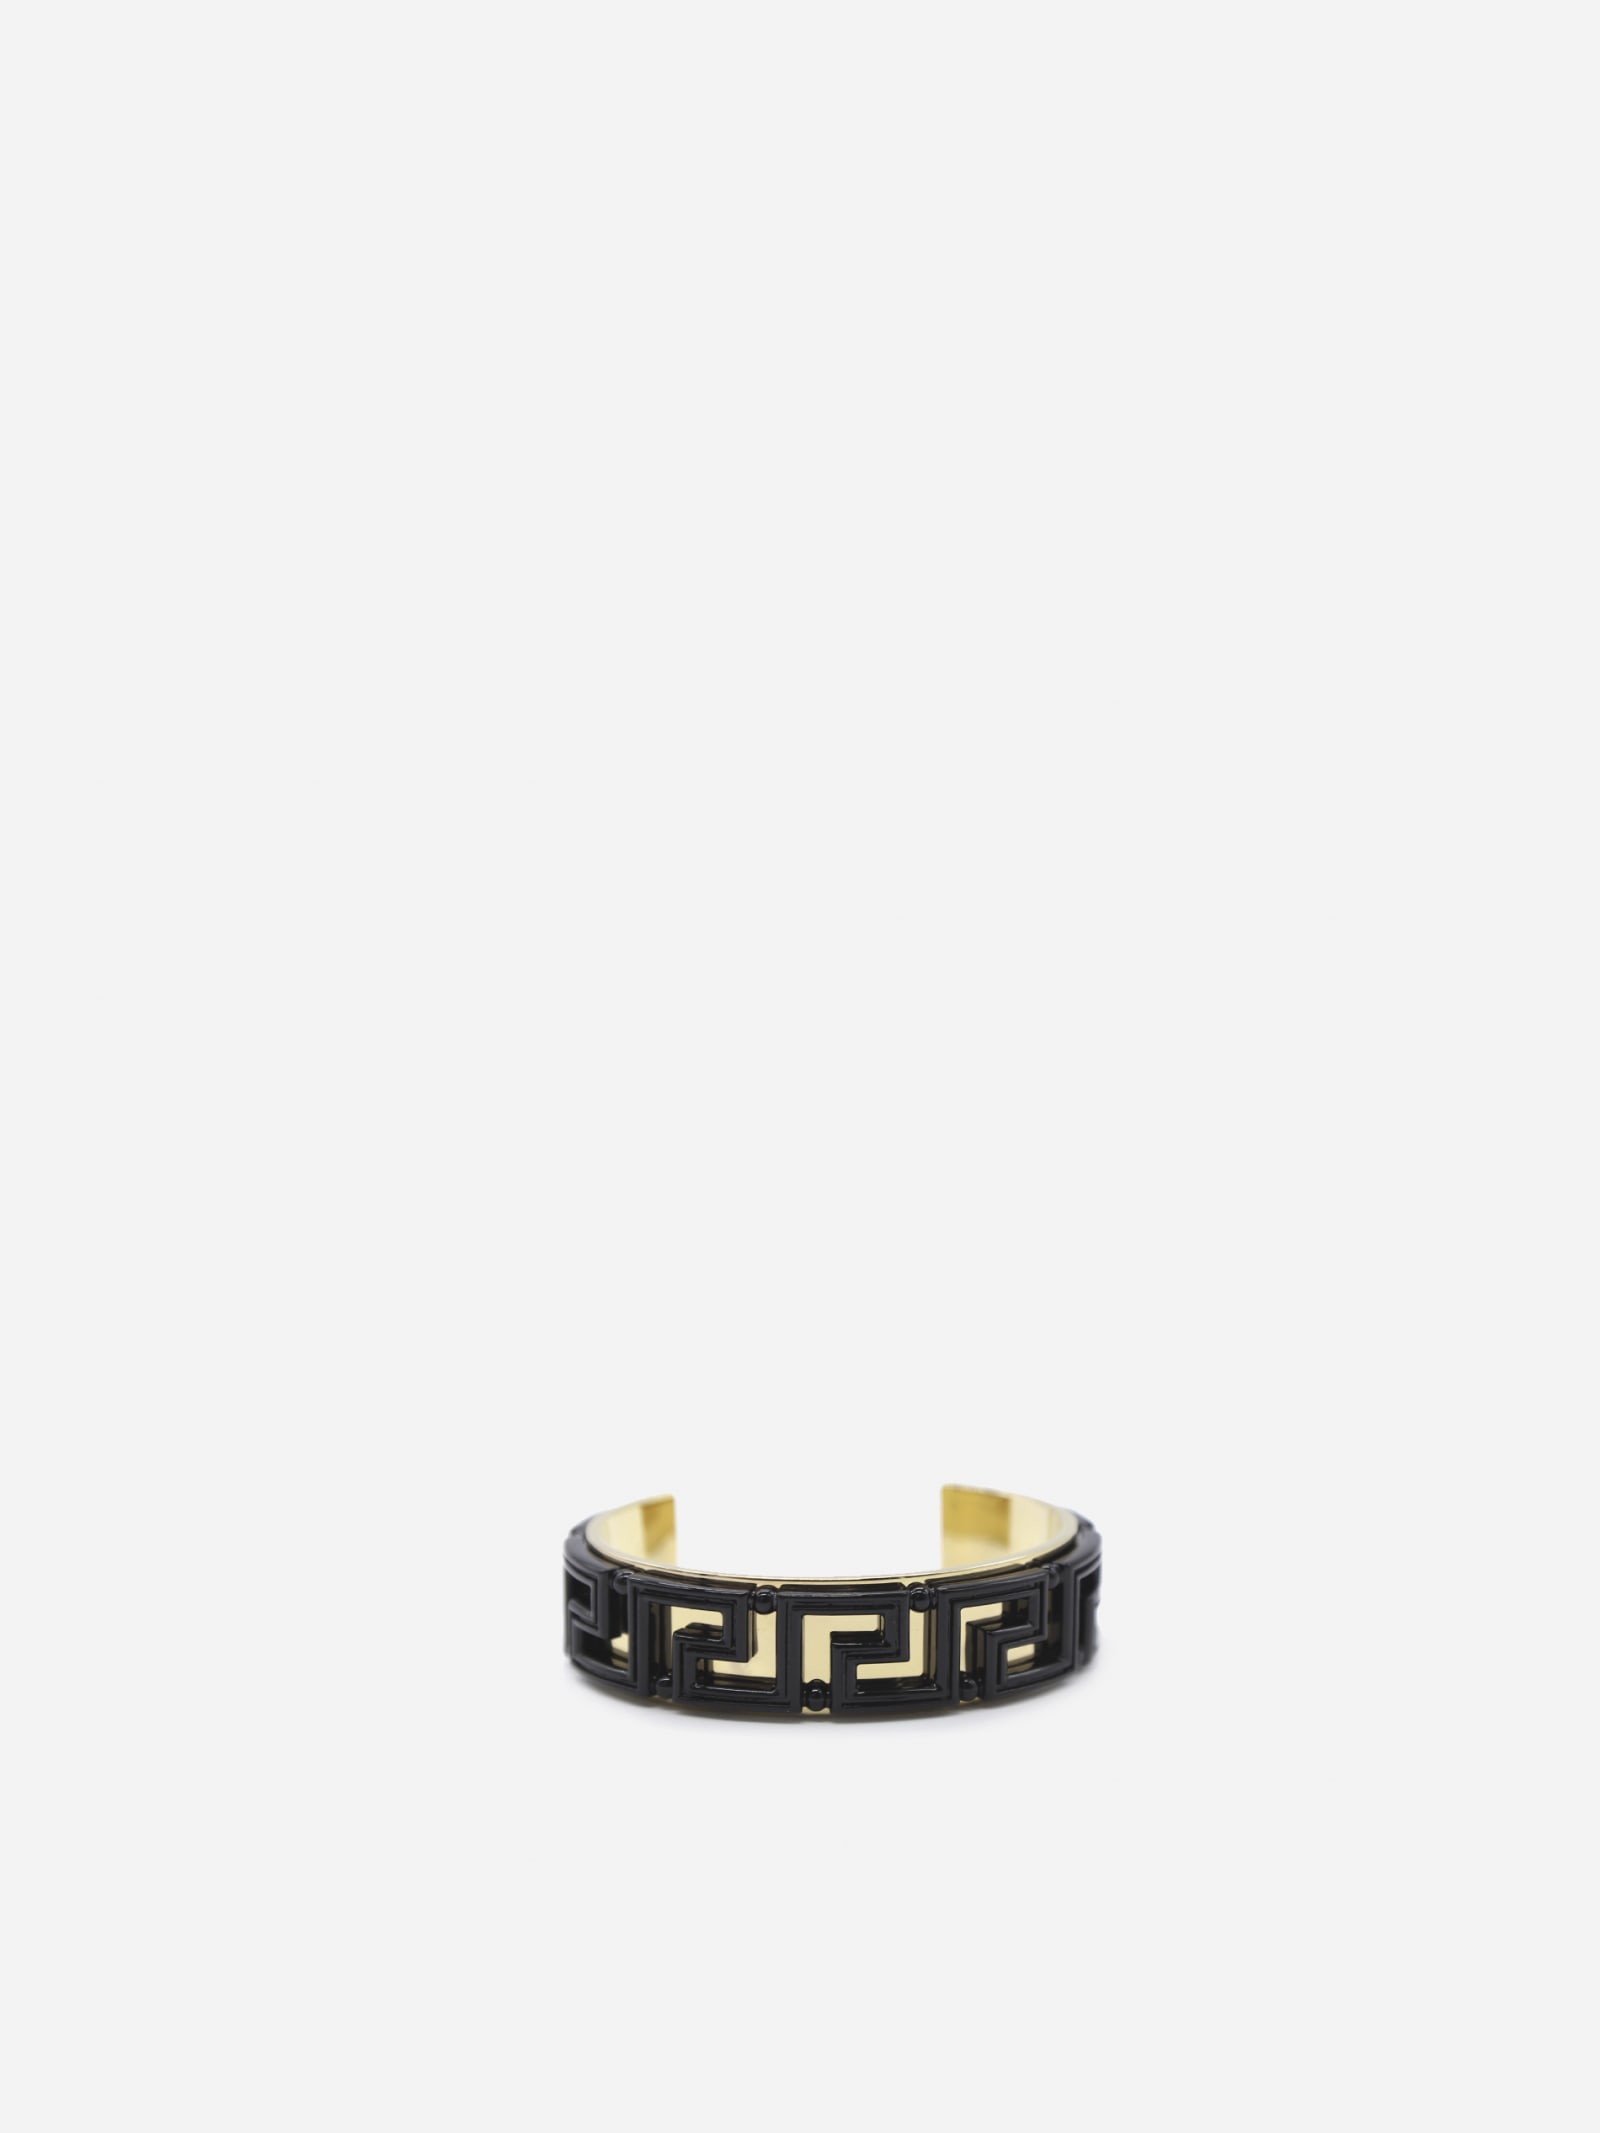 Versace Bracelet With All-over Greek Motif In Shiny Finish